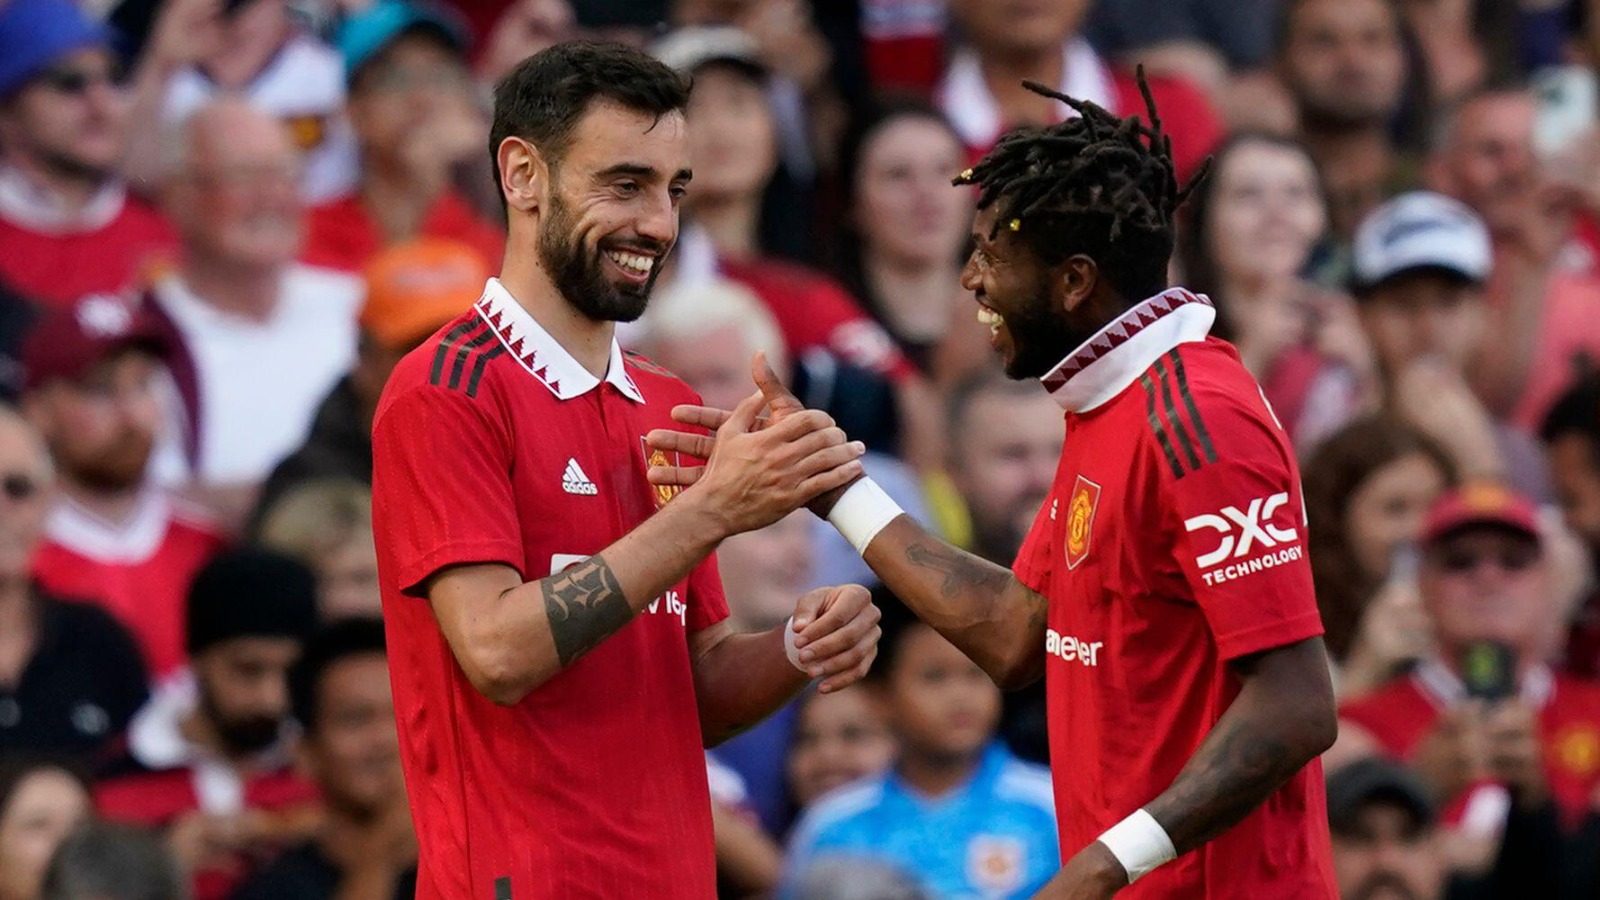 Manchester-United-players-Bruno-Fernandes-and-Fred-celebrate-a-goal